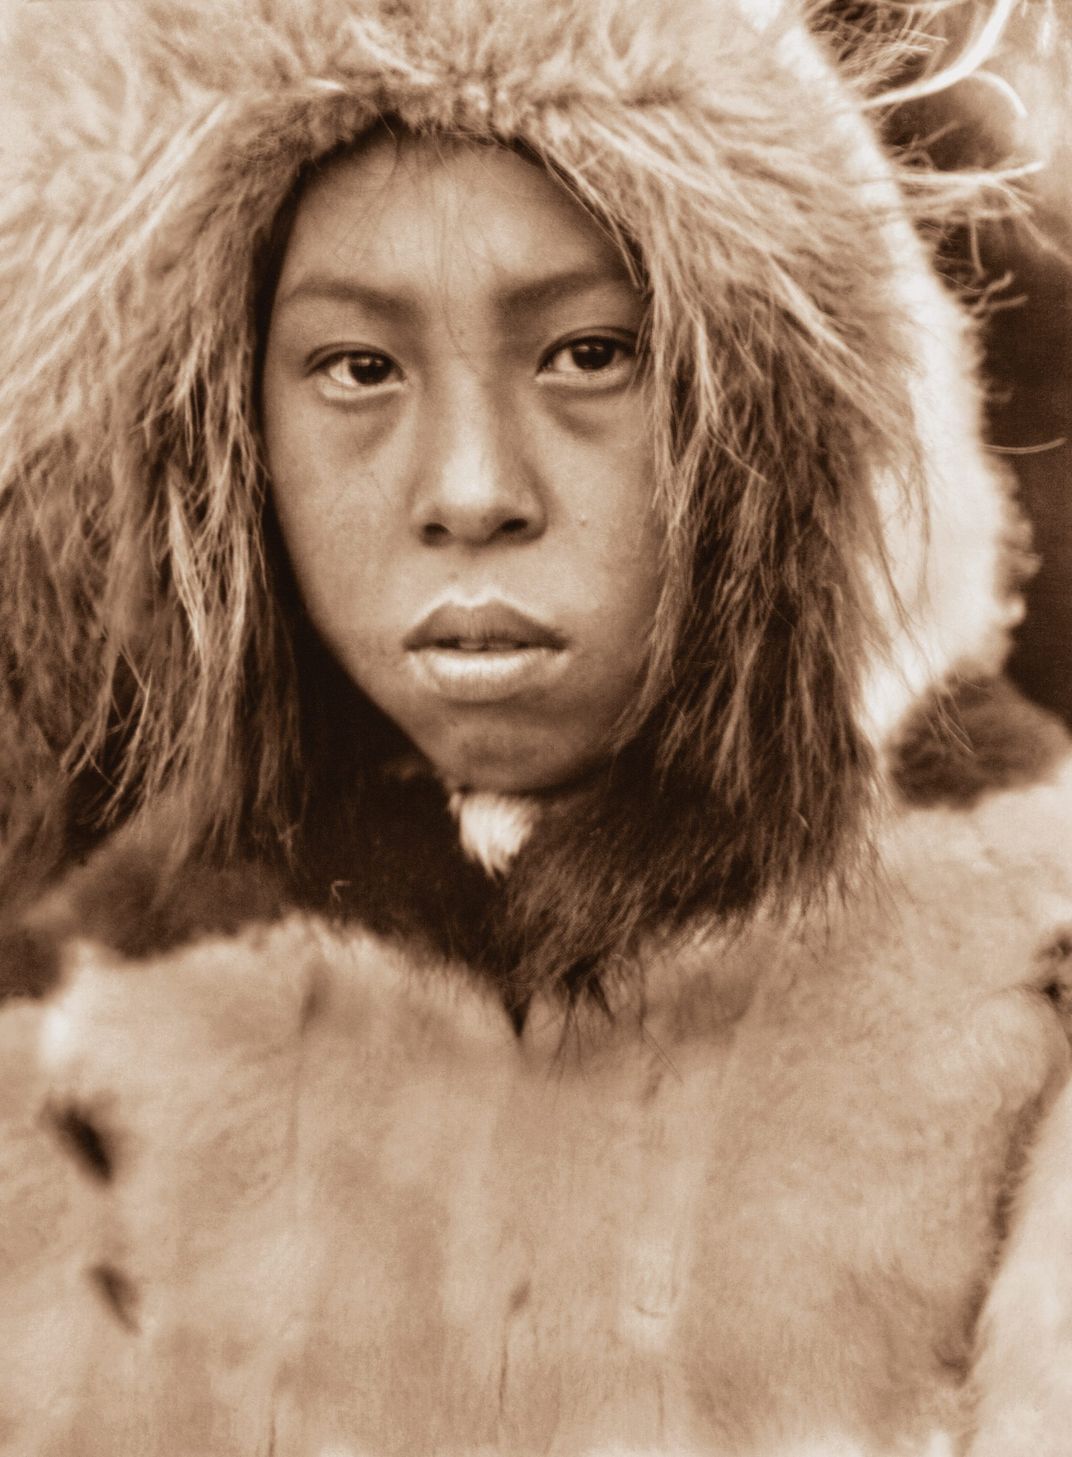 Trove of Unseen Photos Documents Indigenous Culture in 1920s Alaska